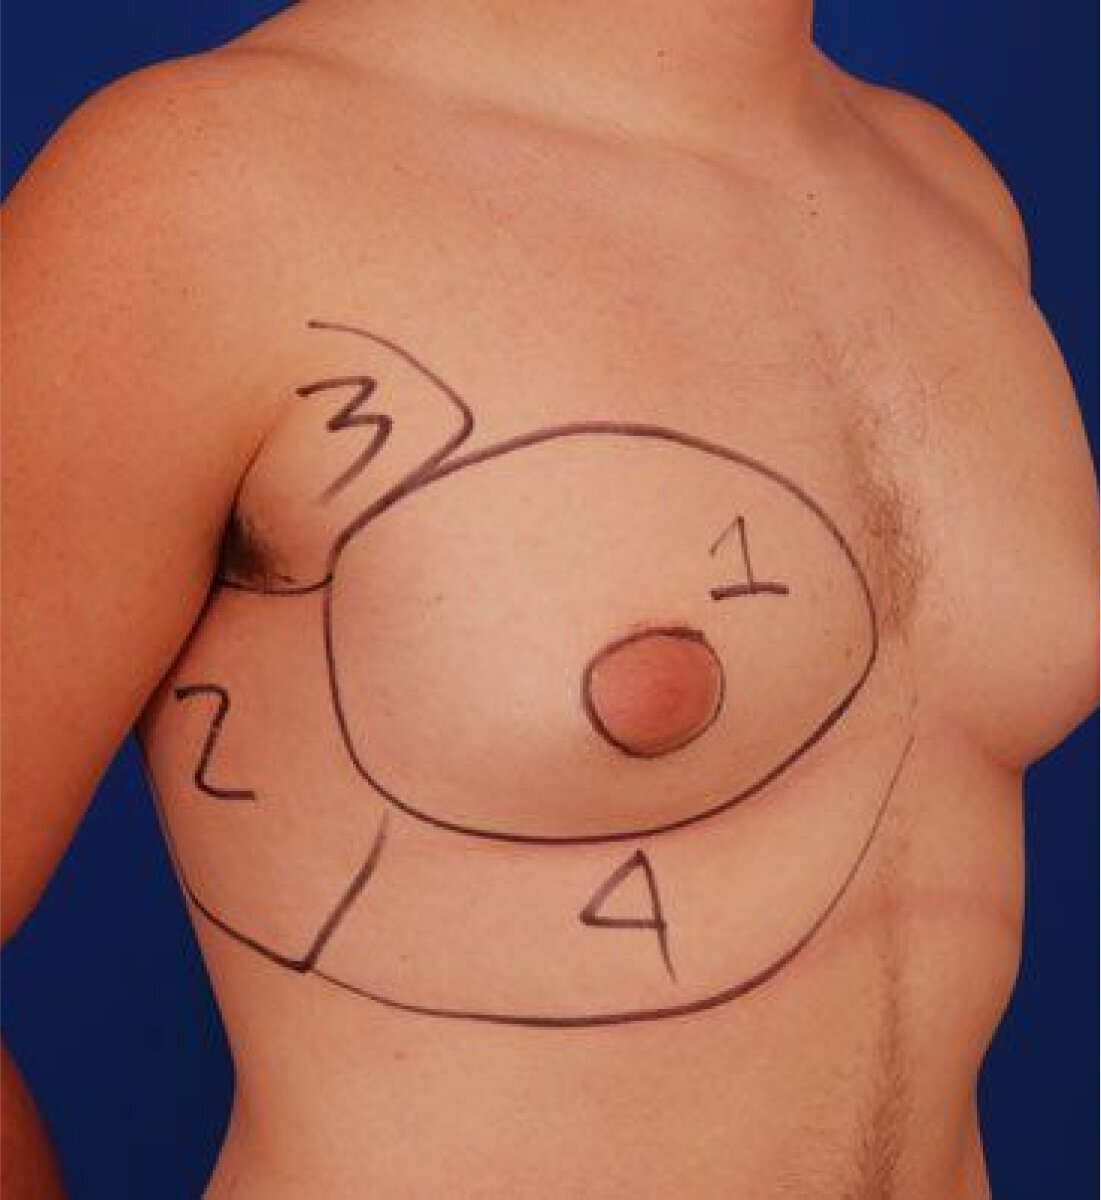 gynecomastia patient with surgical markings